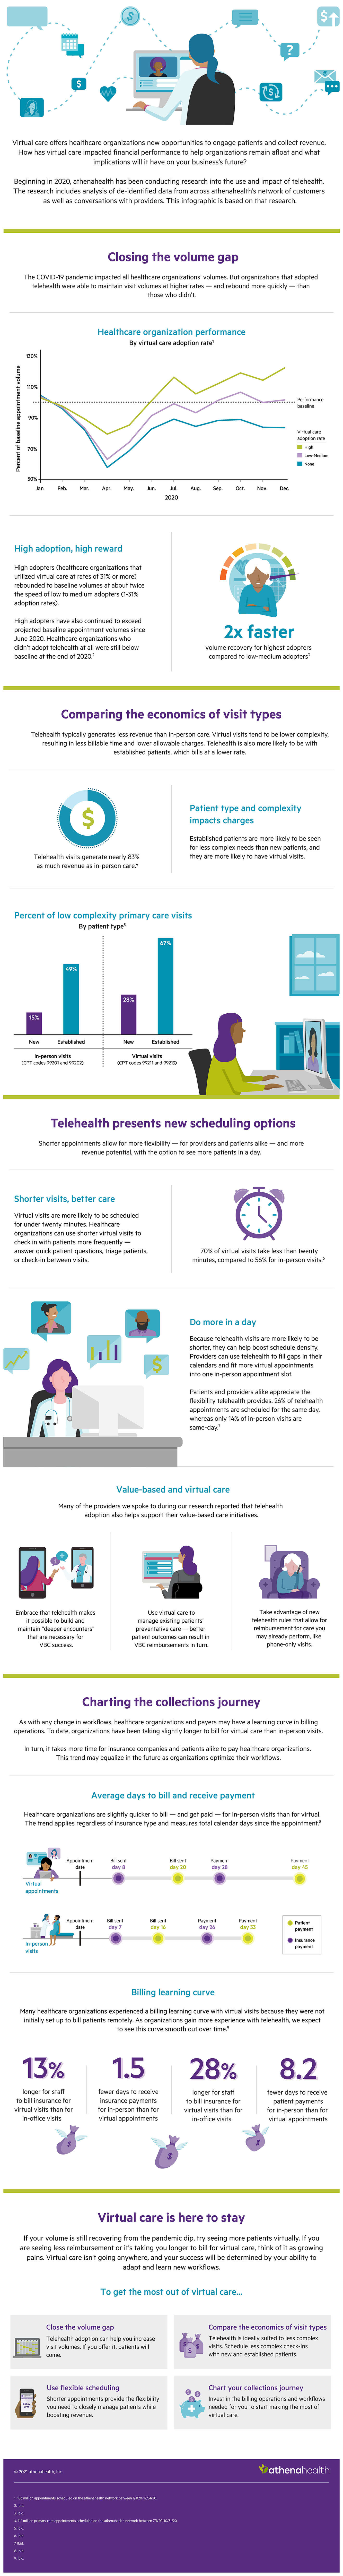 athenahealth infographic explaining the financial ramifications of virtual medical visits